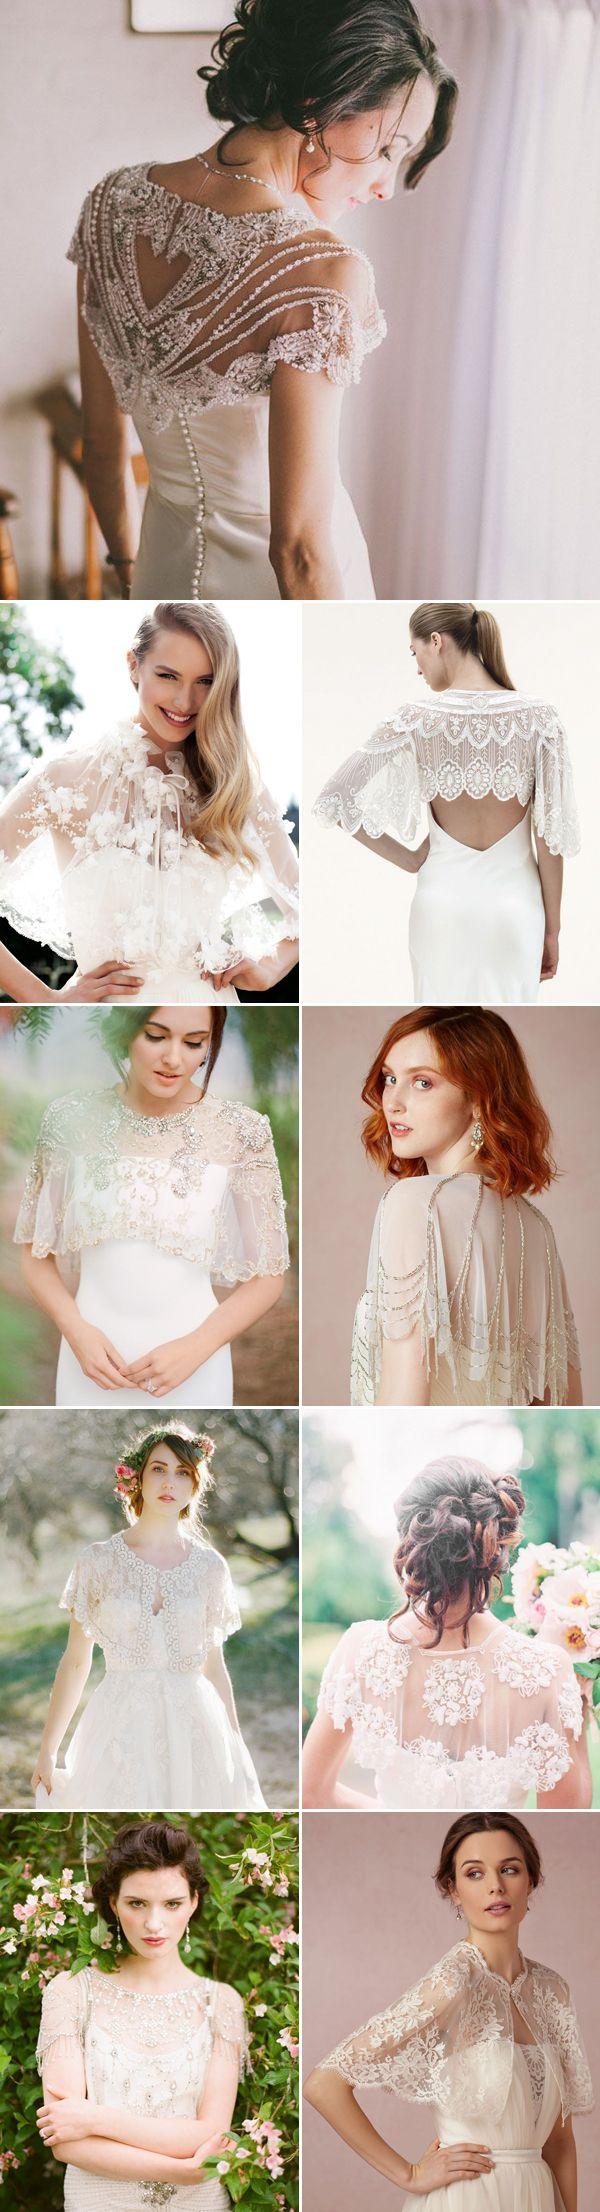 Свадьба - Pretty Ways To Keep The Bride Warm - 22 Chic Bridal Cover-Ups